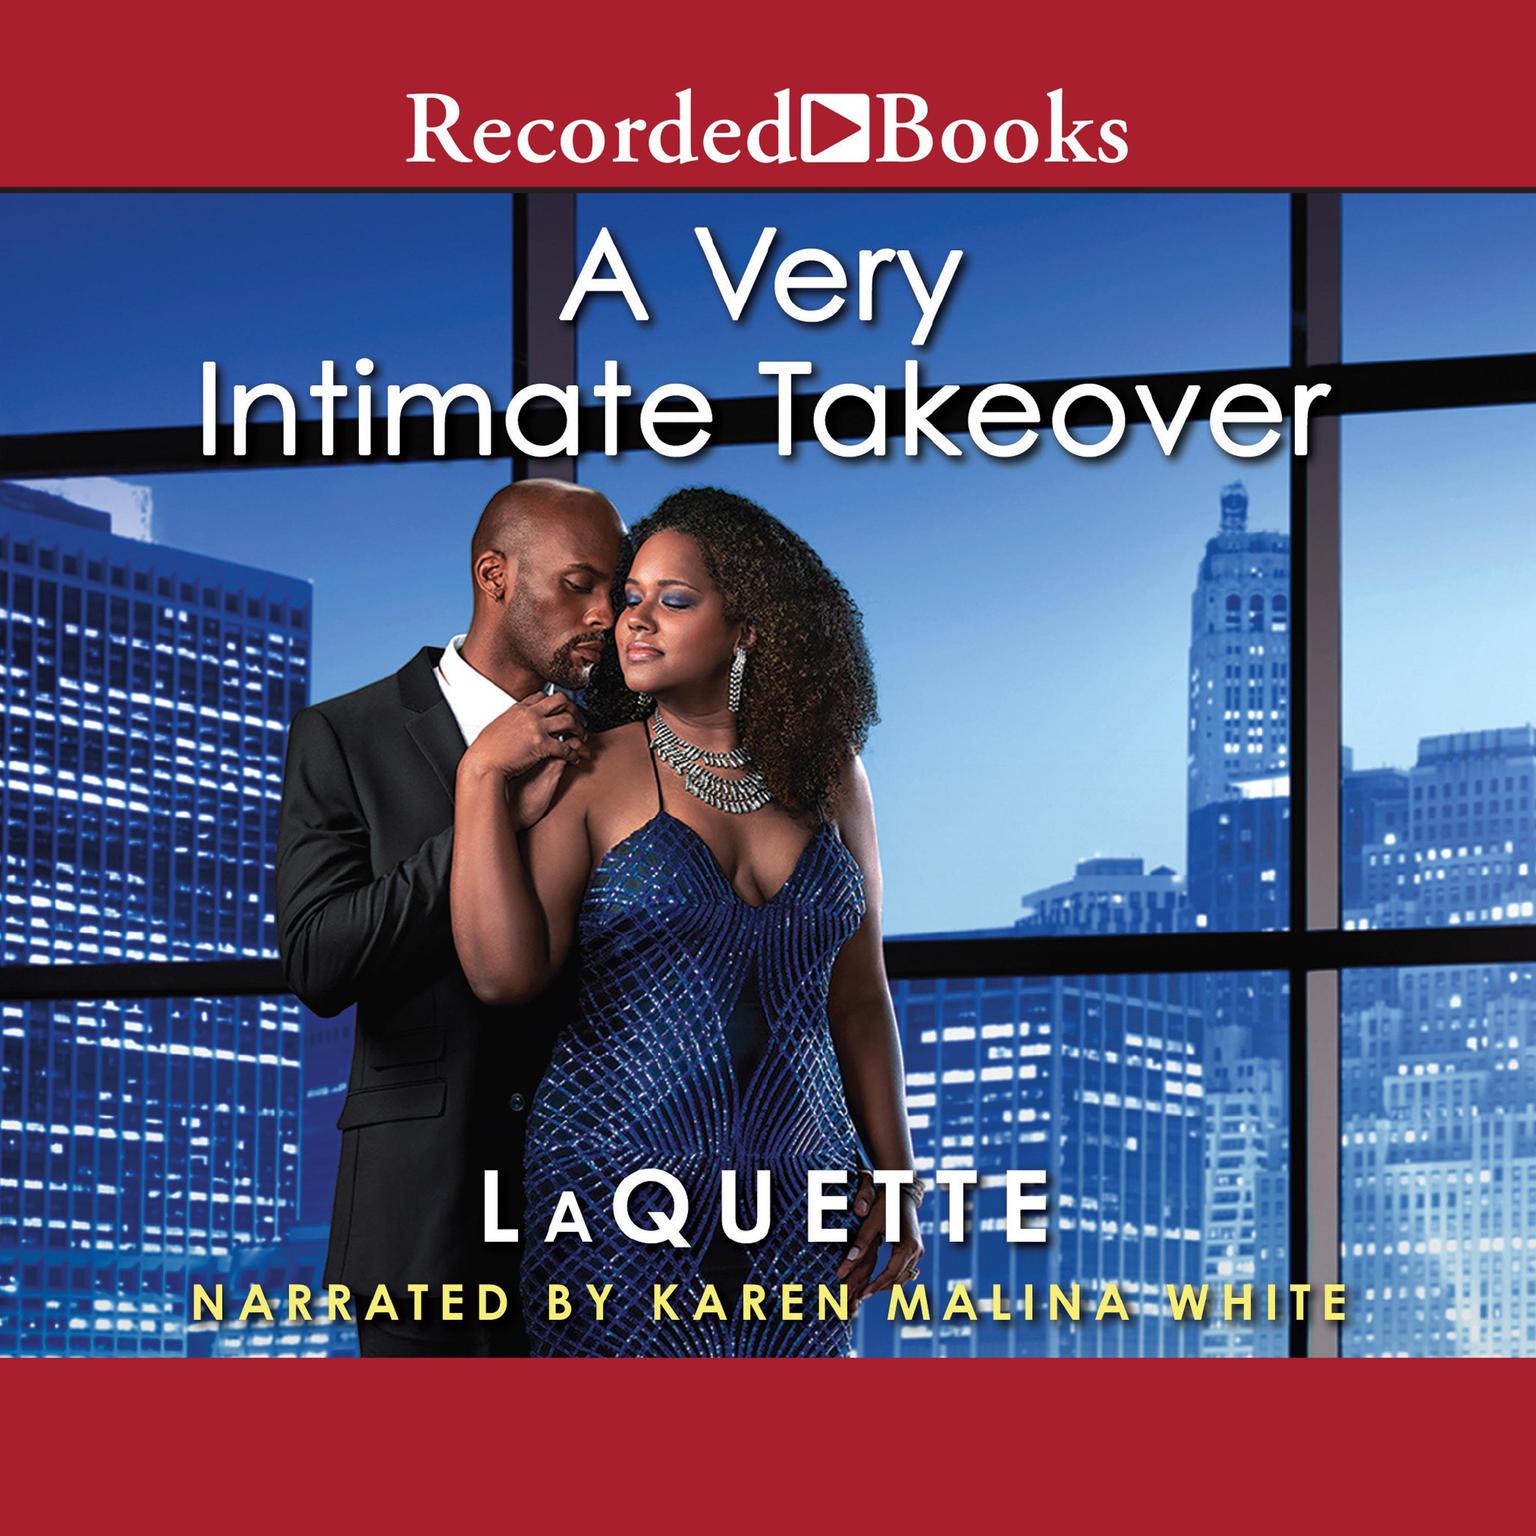 A Very Intimate Takeover: A Sexy Workplace Romance Audiobook, by LaQuette 